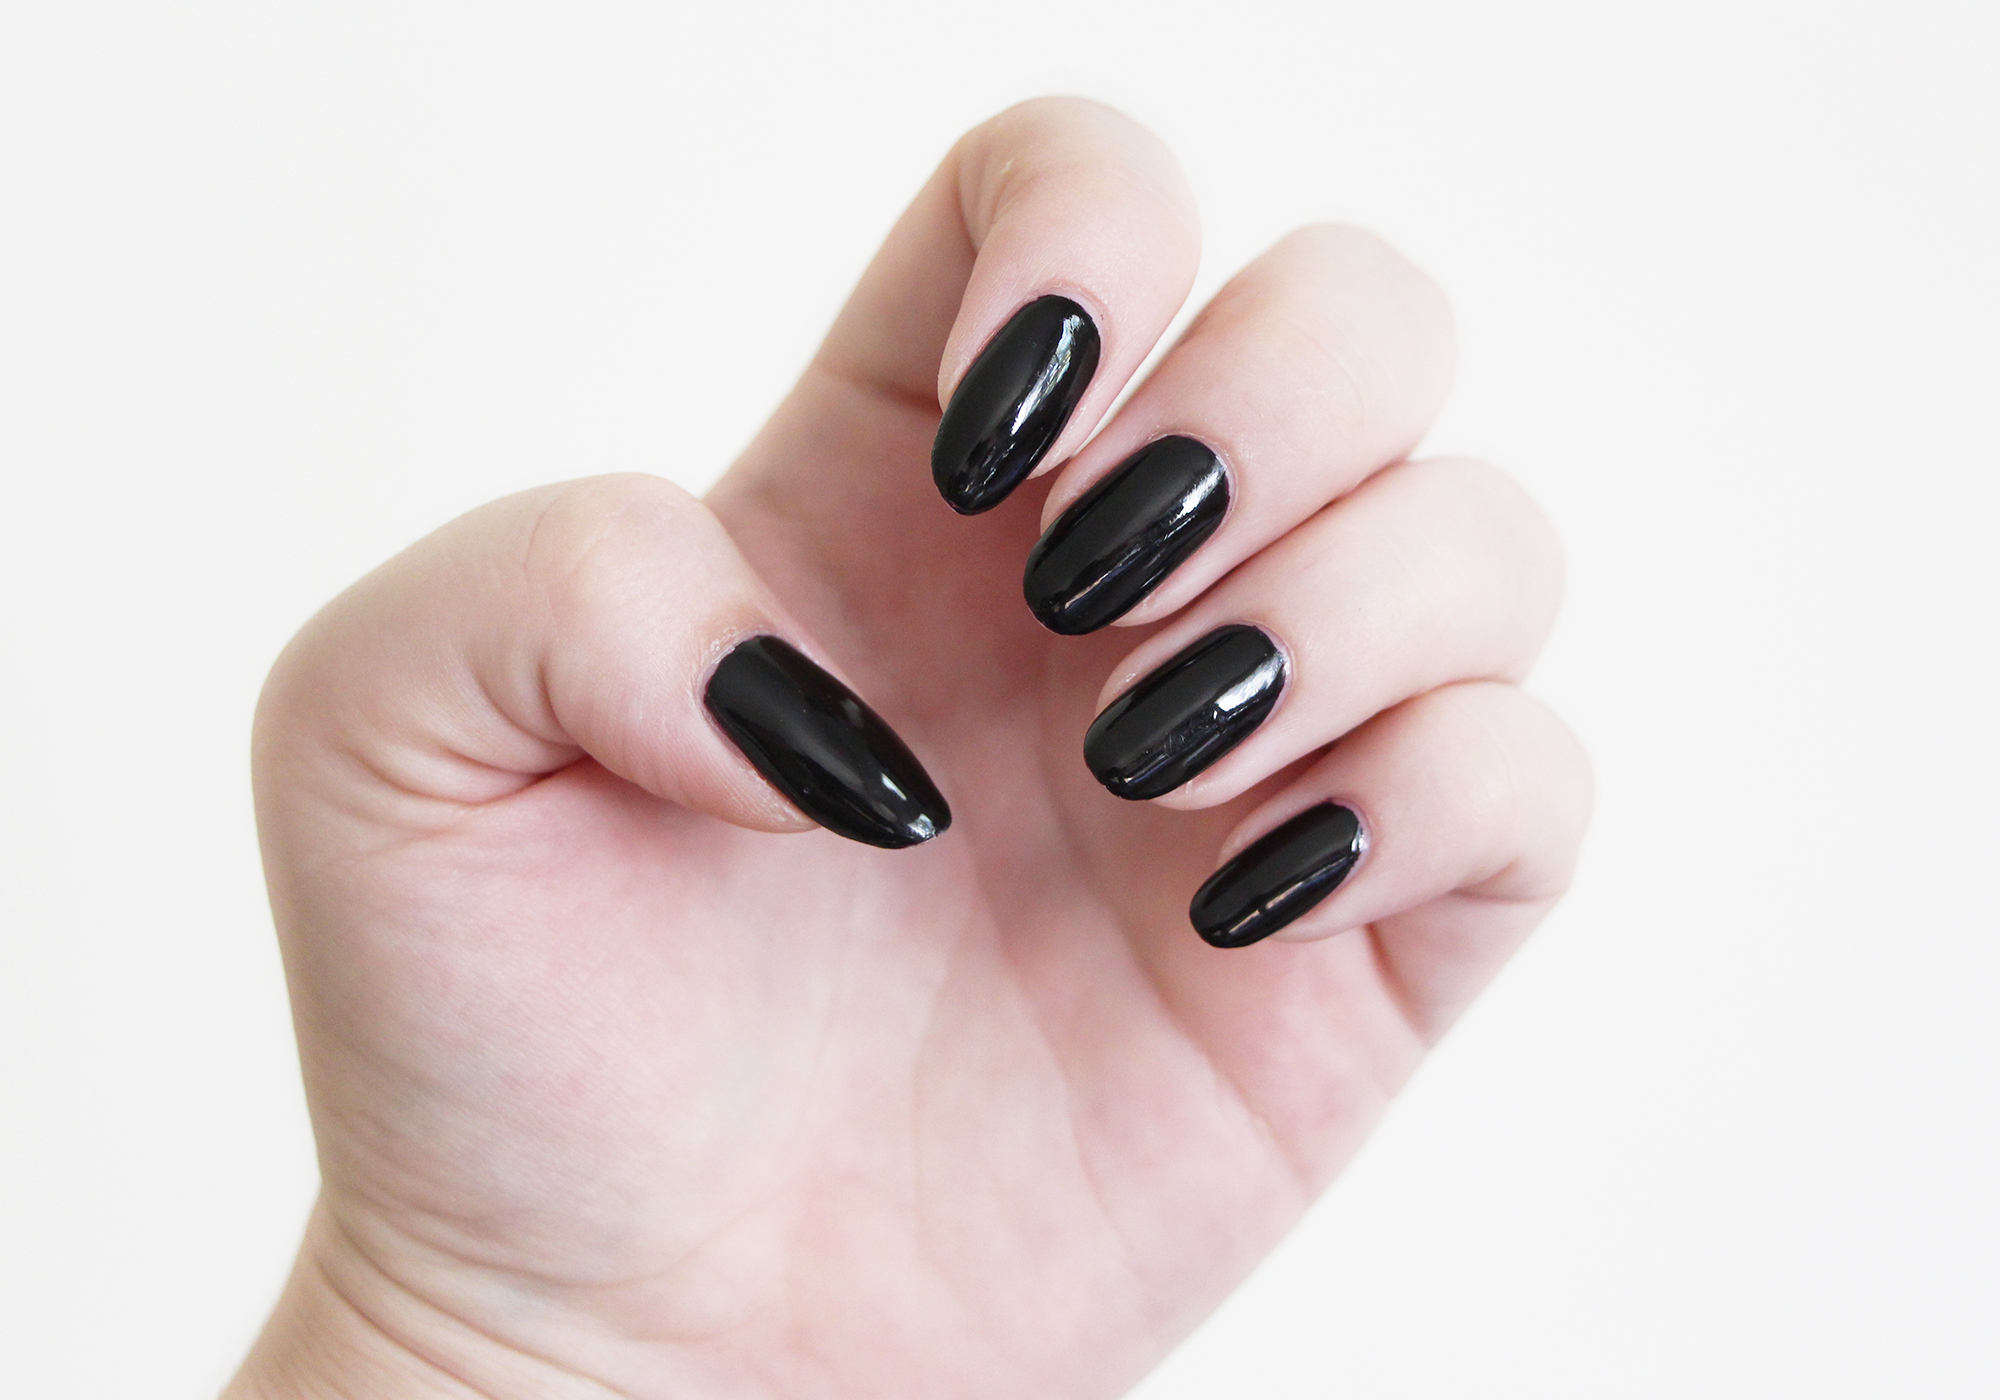 2. OPI Nail Lacquer - Lincoln Park After Dark - wide 2